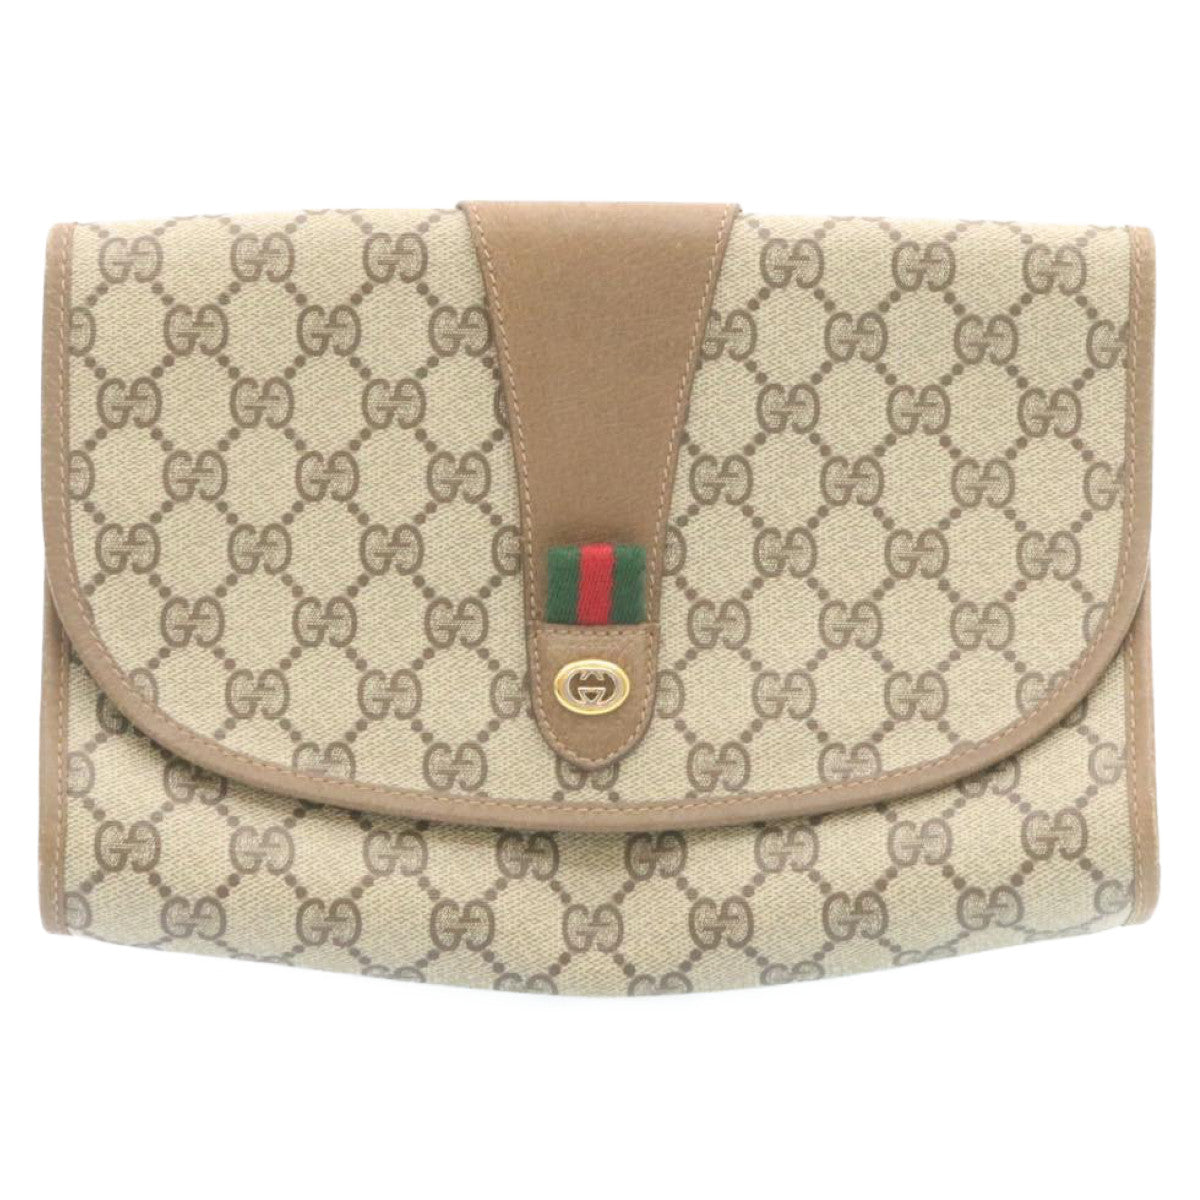 GUCCI Web Sherry Line GG Canvas Clutch Bag Beige Red Green Auth th2124